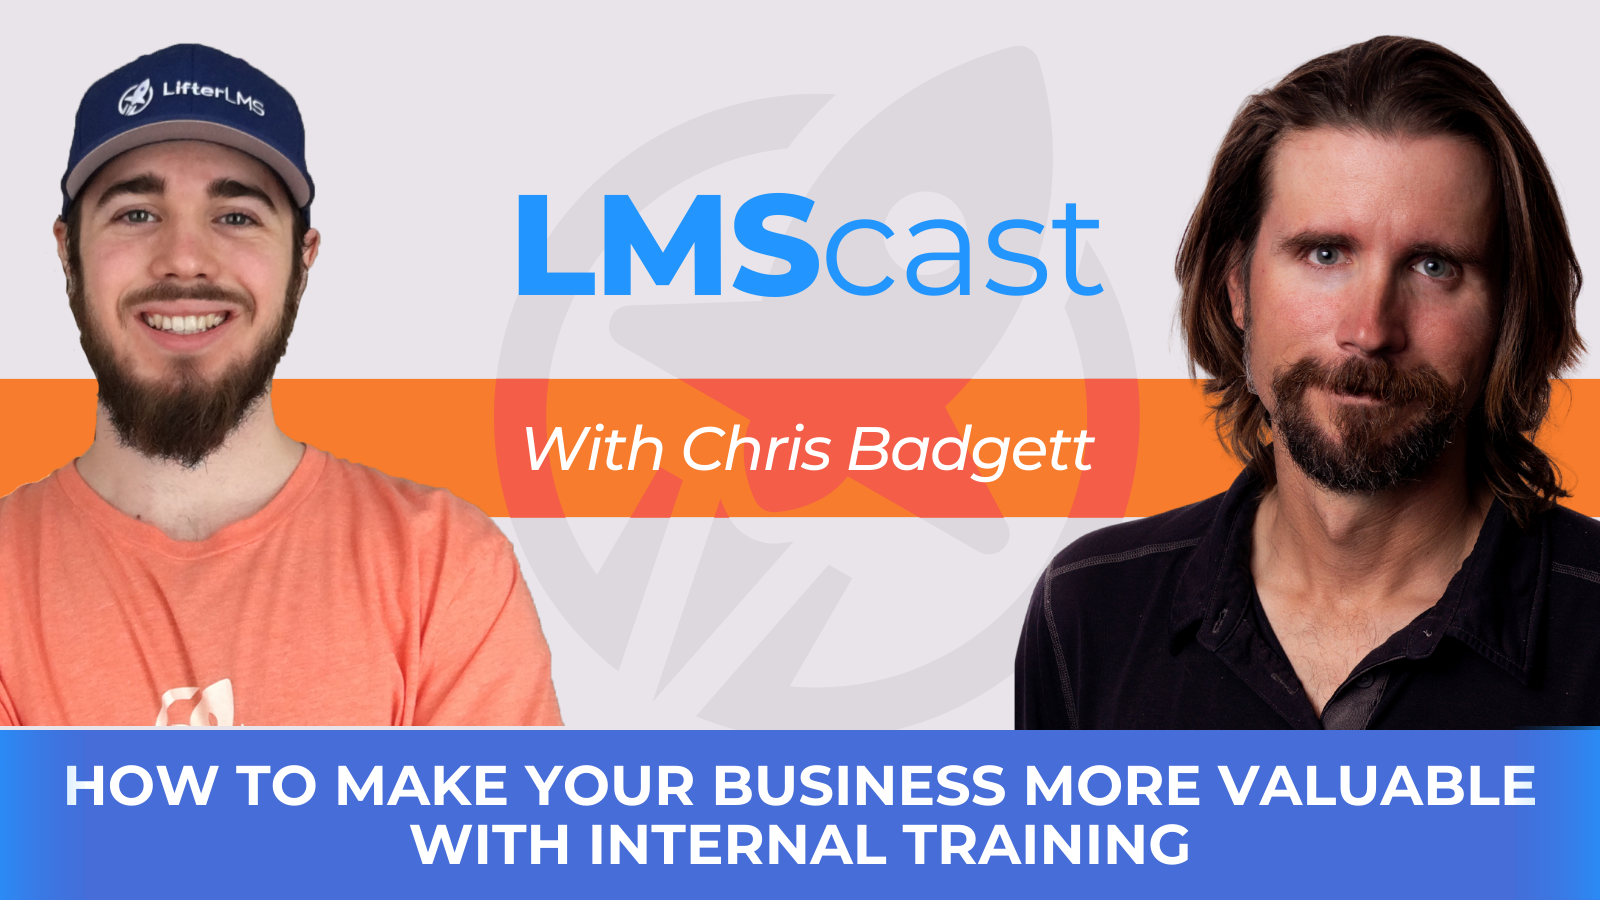 How to Make Your Business More Valuable with Internal Training